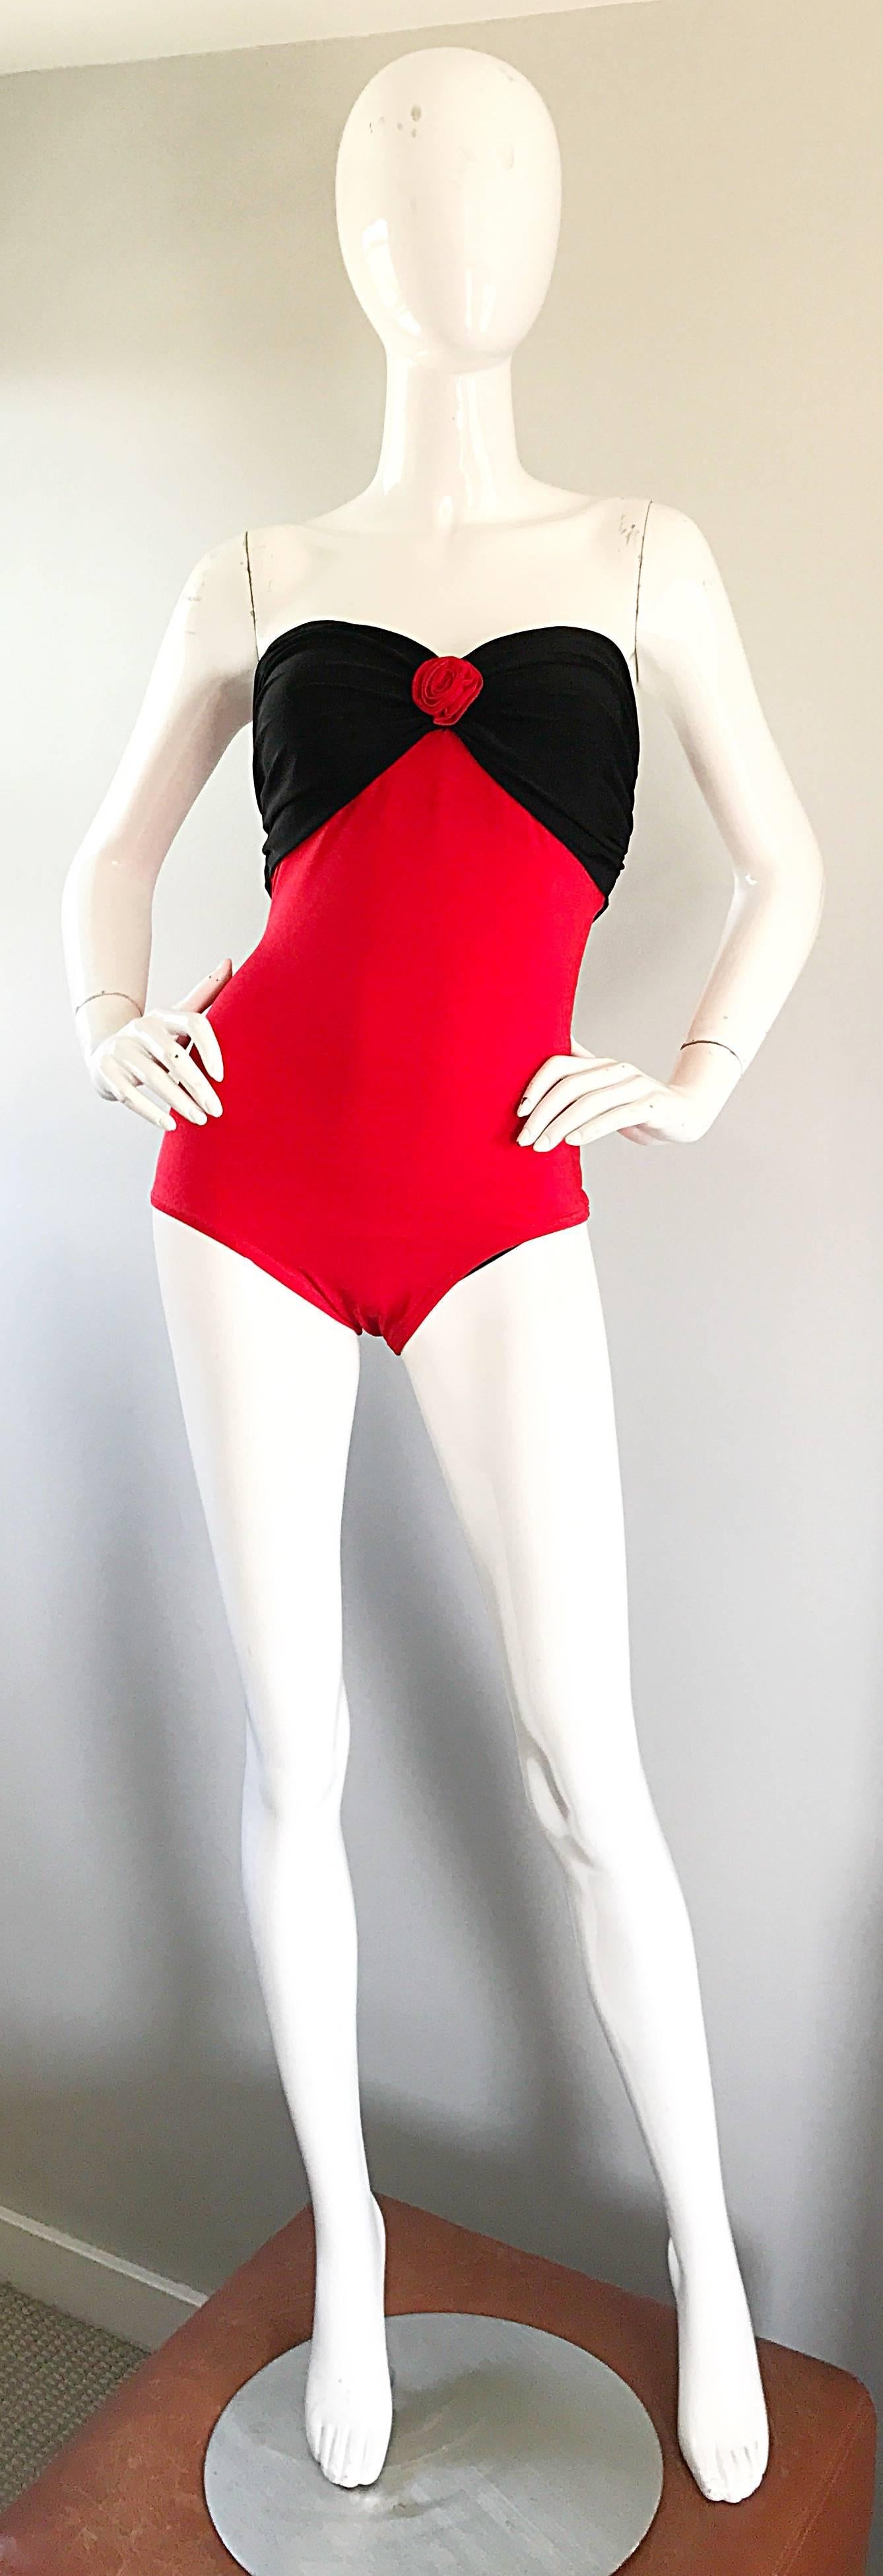 Sexy vintage YVES SAINT LAURENT 1980s red and black color block heart motif one piece strapless swimsuit or bodysuit! Features a stretch to fit lipstick red body, with a black ruched bust that forms the shape of a heart. Simple step into this